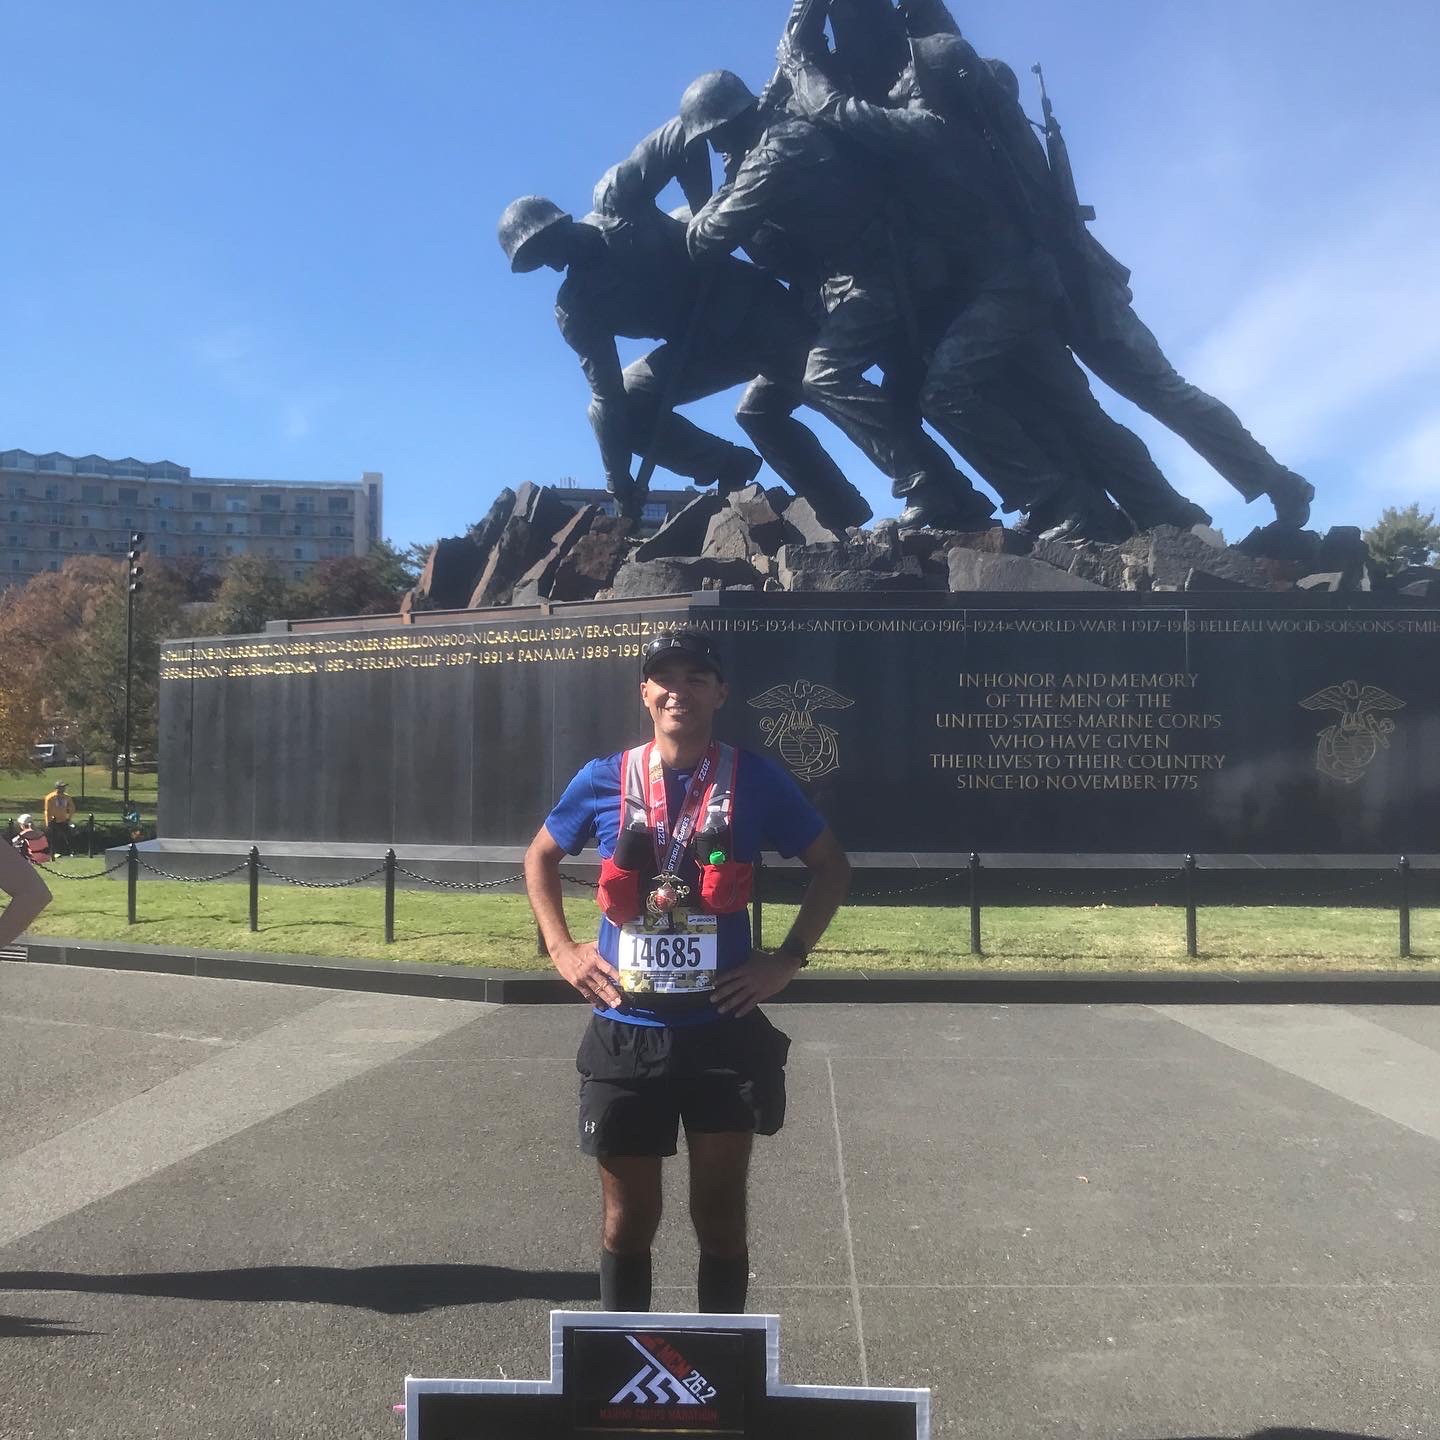 Miguel Ramirez poses for a photo in front of the Iwo Jima War Memorial 